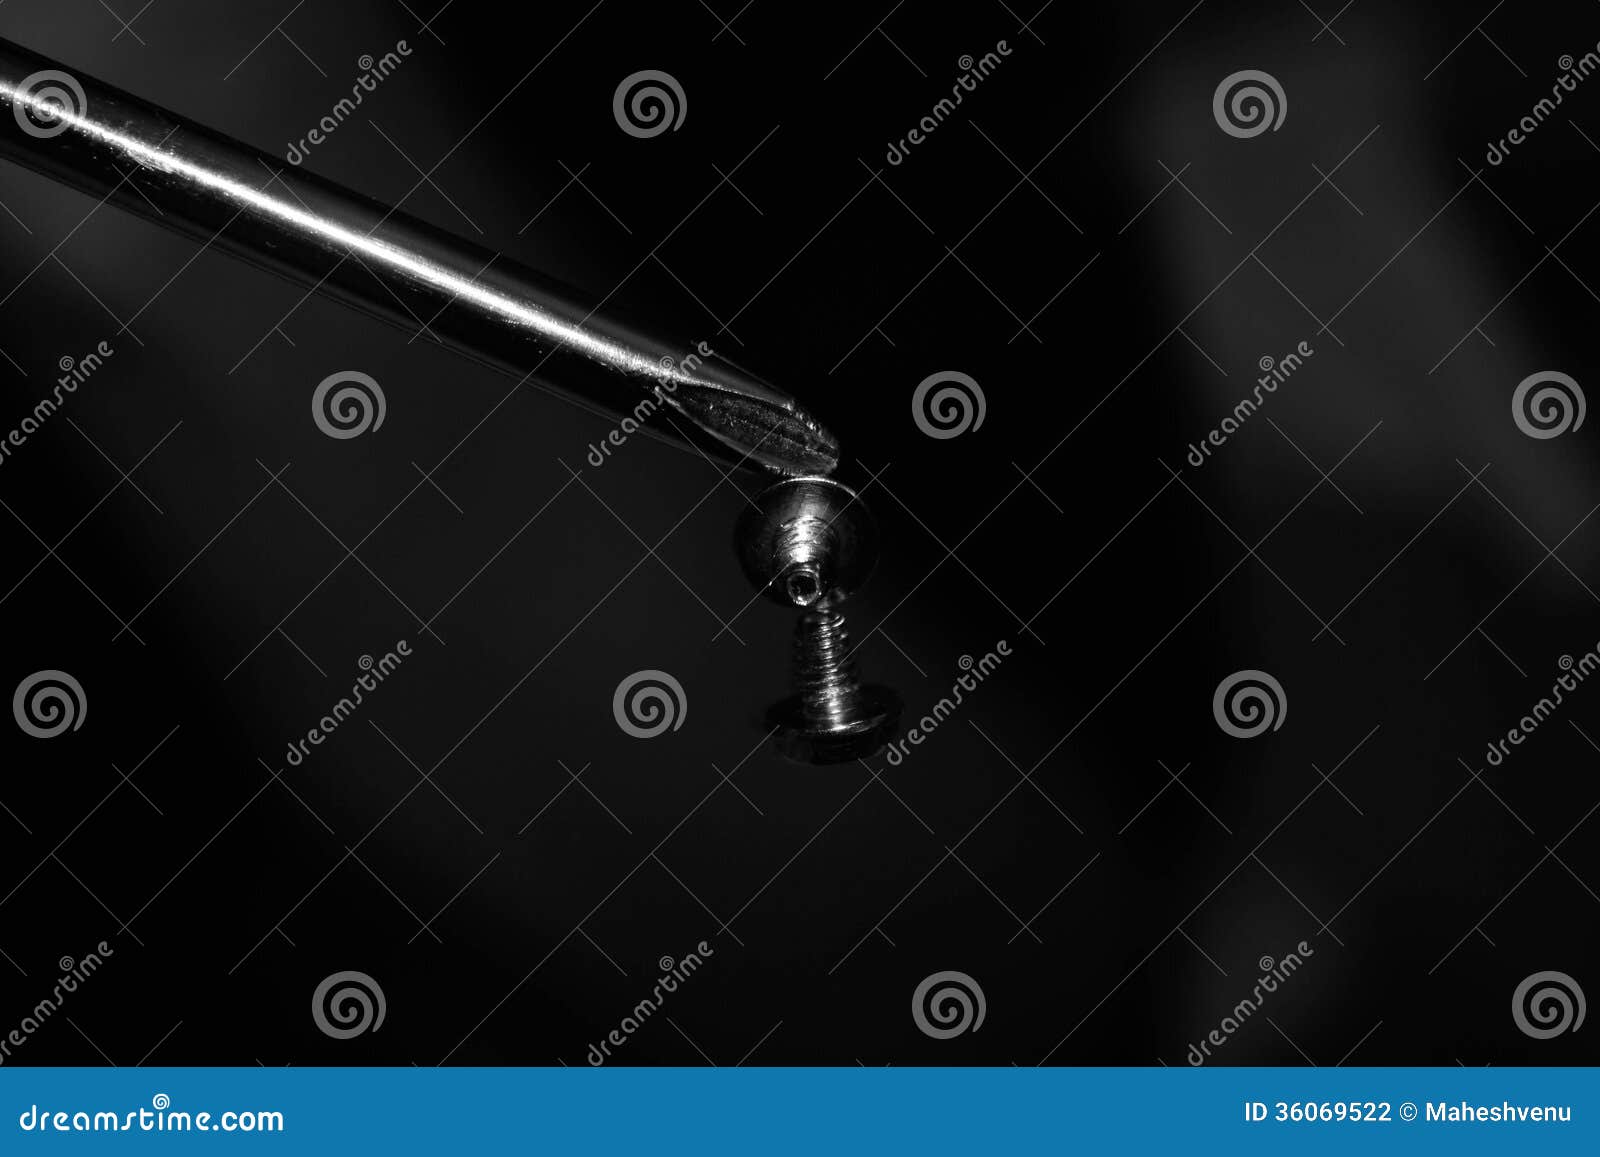 And screwdriver stock photo. Image of silver, help, work - 36069522